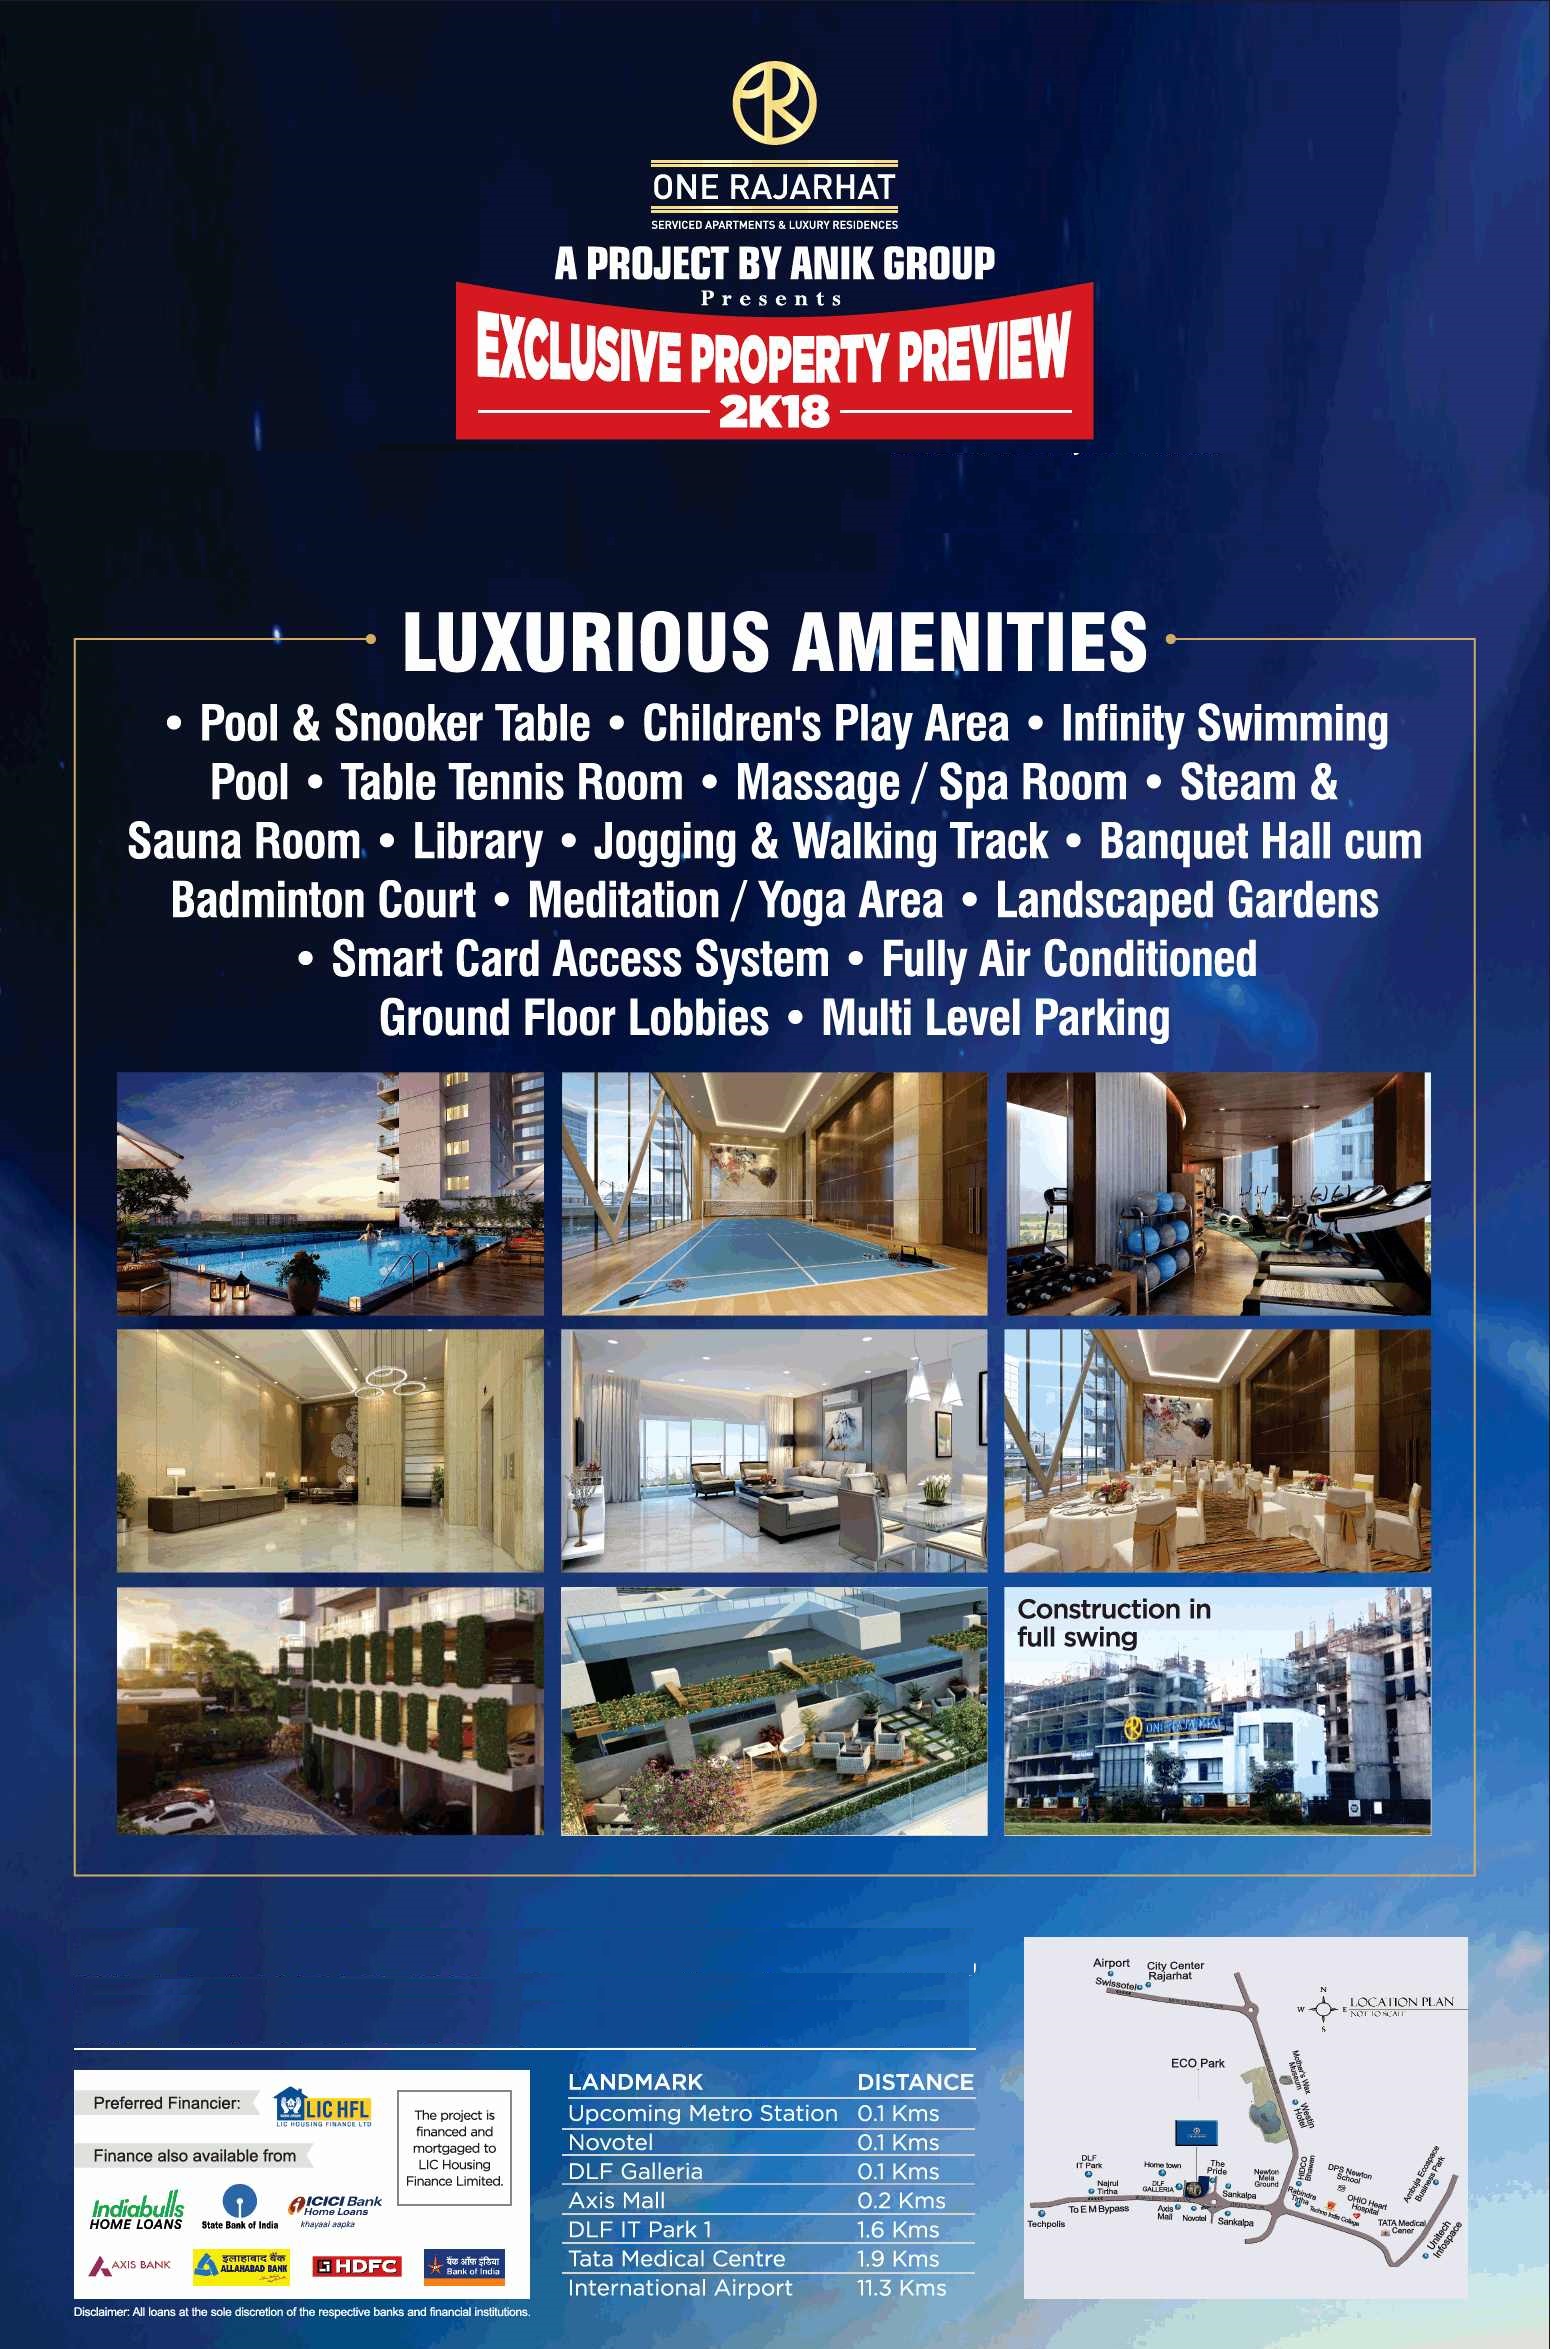 Book your homes with luxurious amenities at Ruchi One Rajarhat in Kolkata